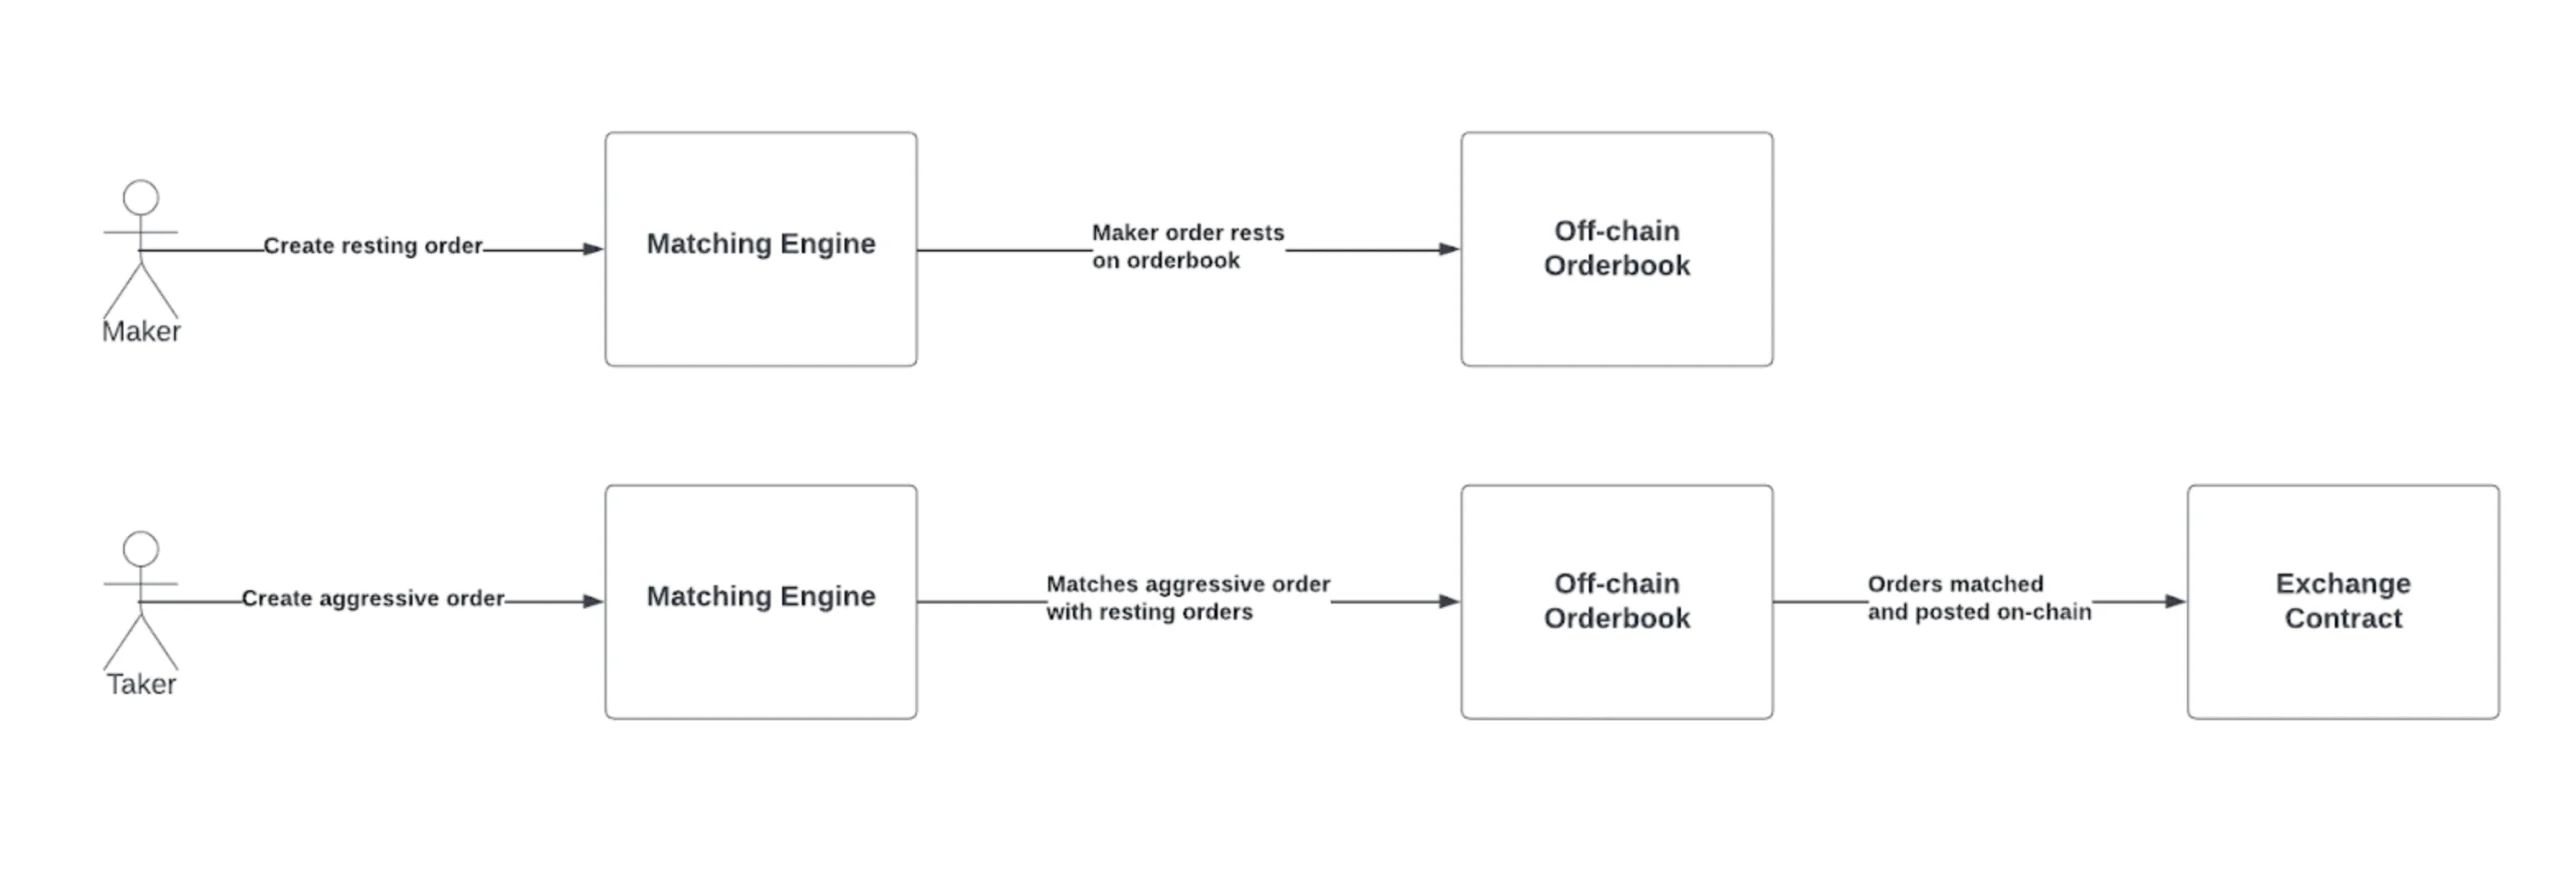 Off Chain Orderbook